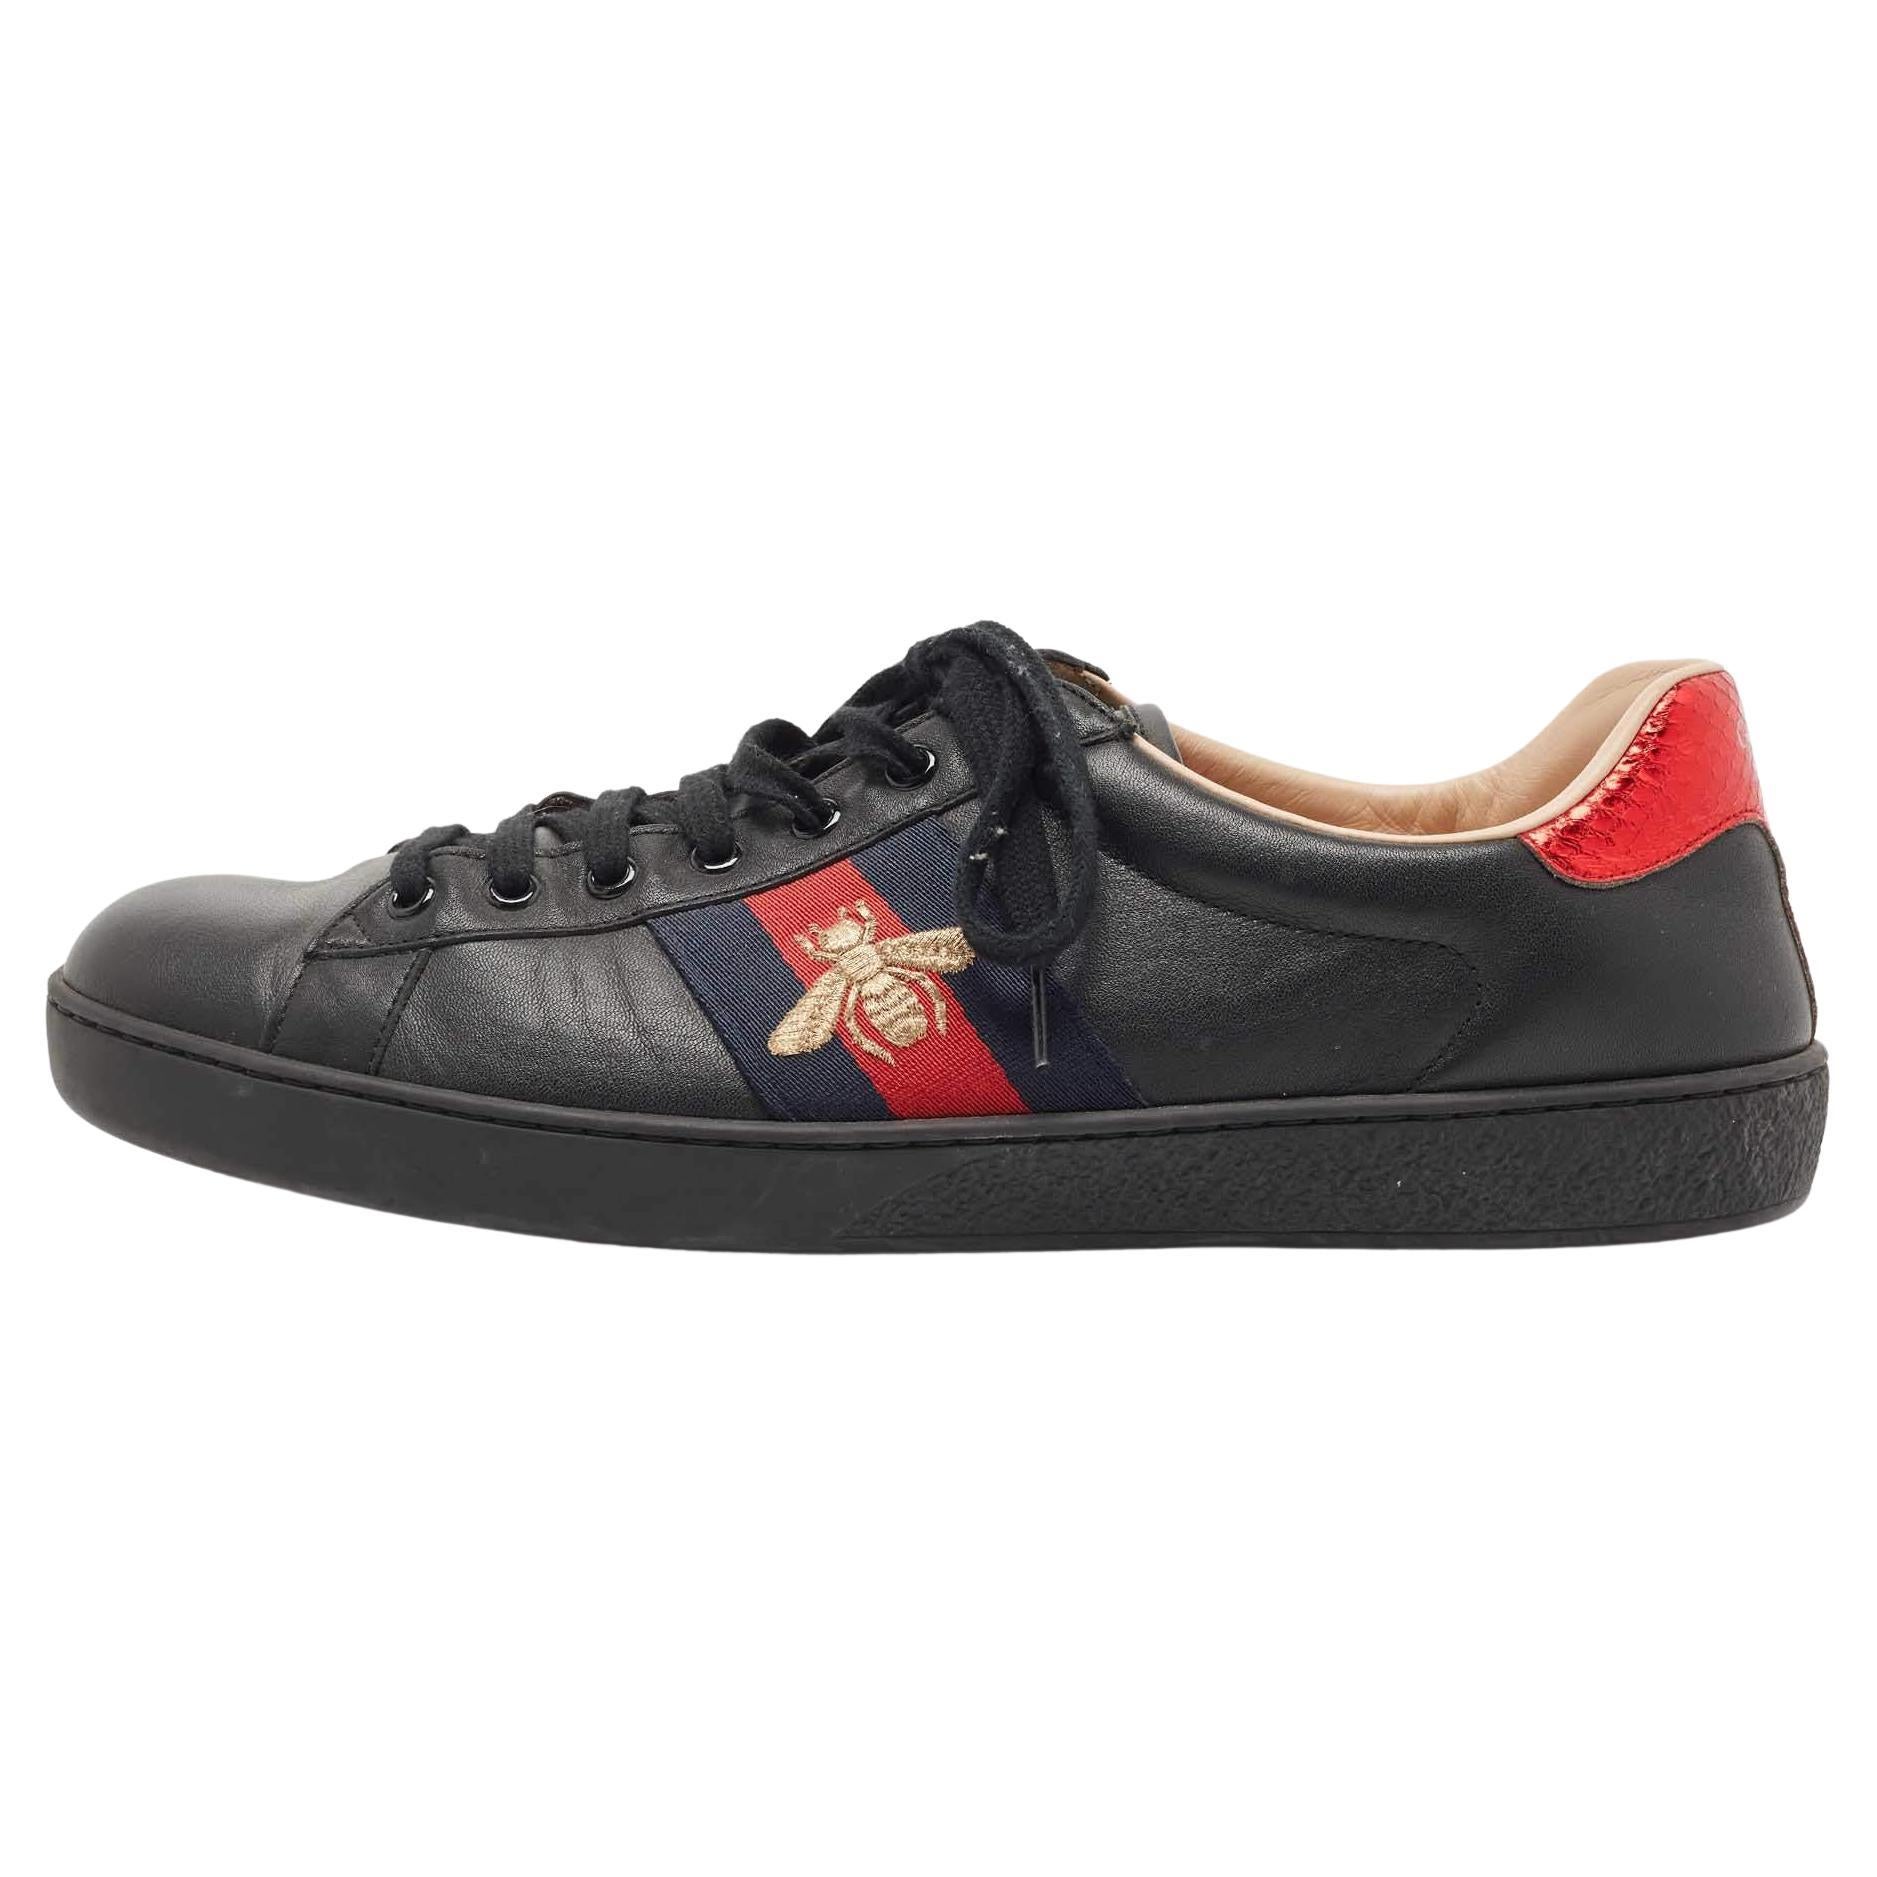 Gucci Black Leather Ace Low Top Sneakers Size 44